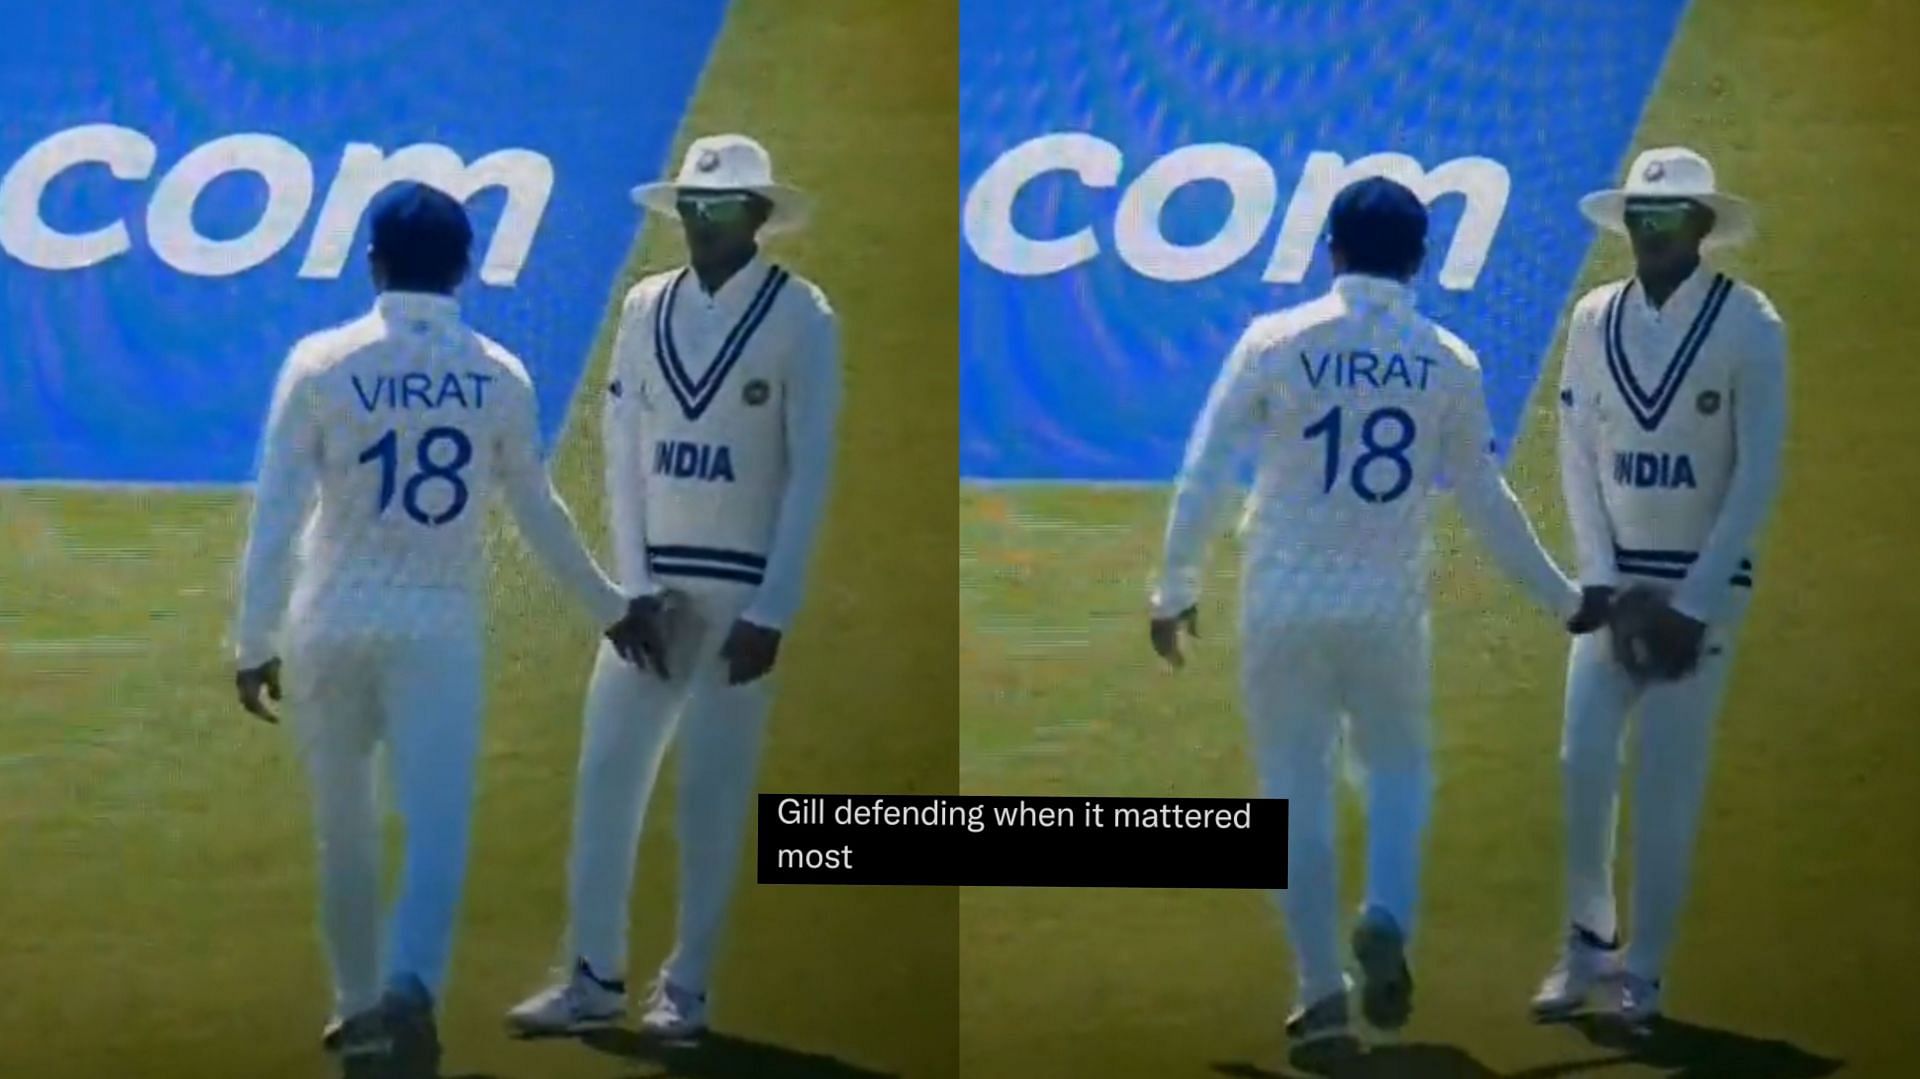 Virat Kohli pulled off a mischievous act in the middle (Image: Twitter)